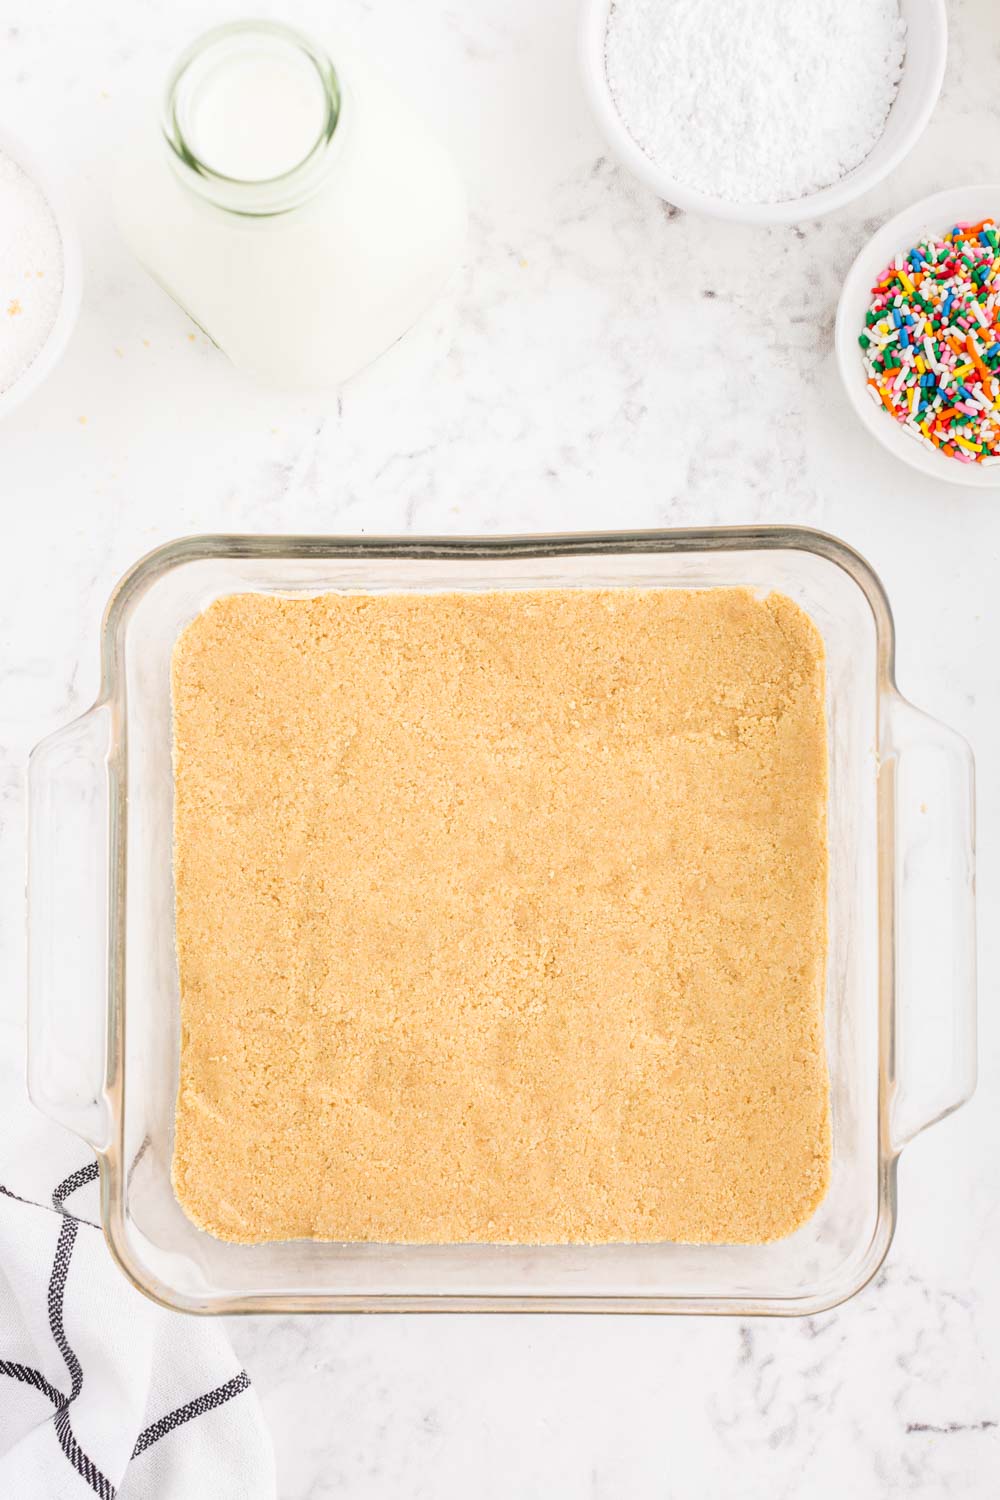 Vanilla cookie base pressed into a 8x8-inch glass dish, small bowl of rainbowl sprinkles, glass jar of whole milk, bowl of powdered sugar, striped linen, on a white marble surface.